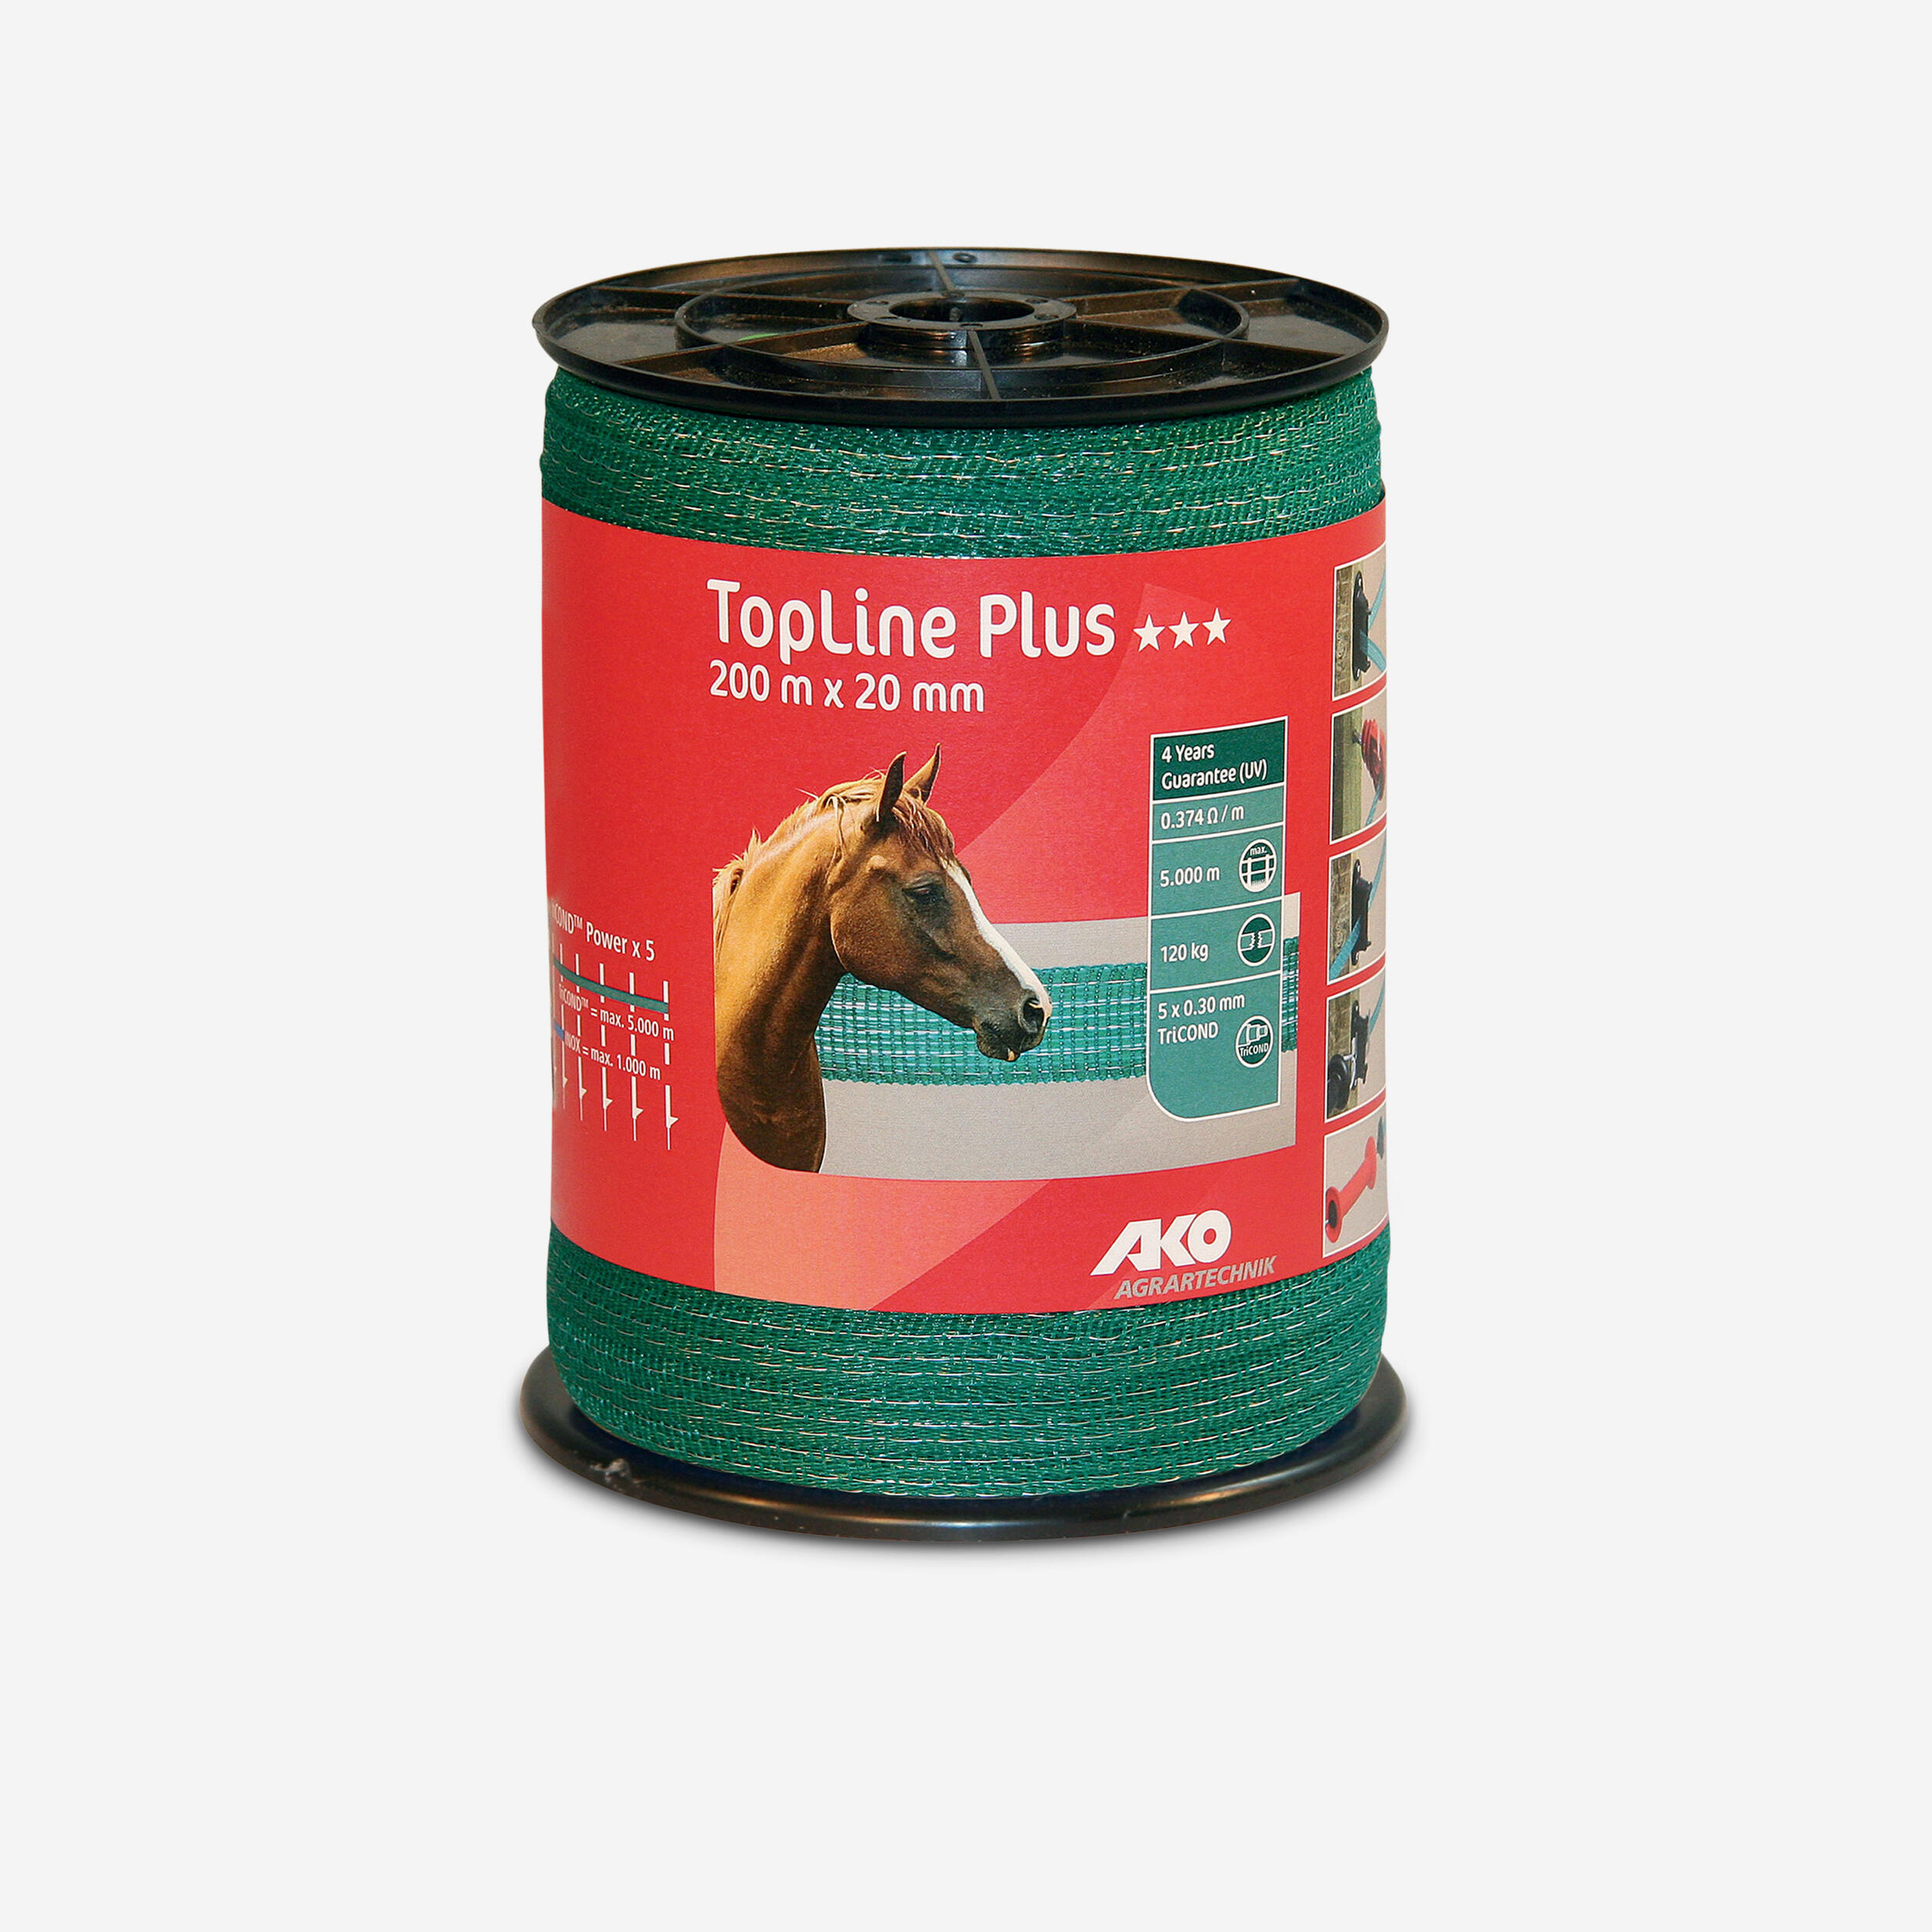 Top Line Horse Riding Fencing Tape 20 mm x 200 m - Green 1/1